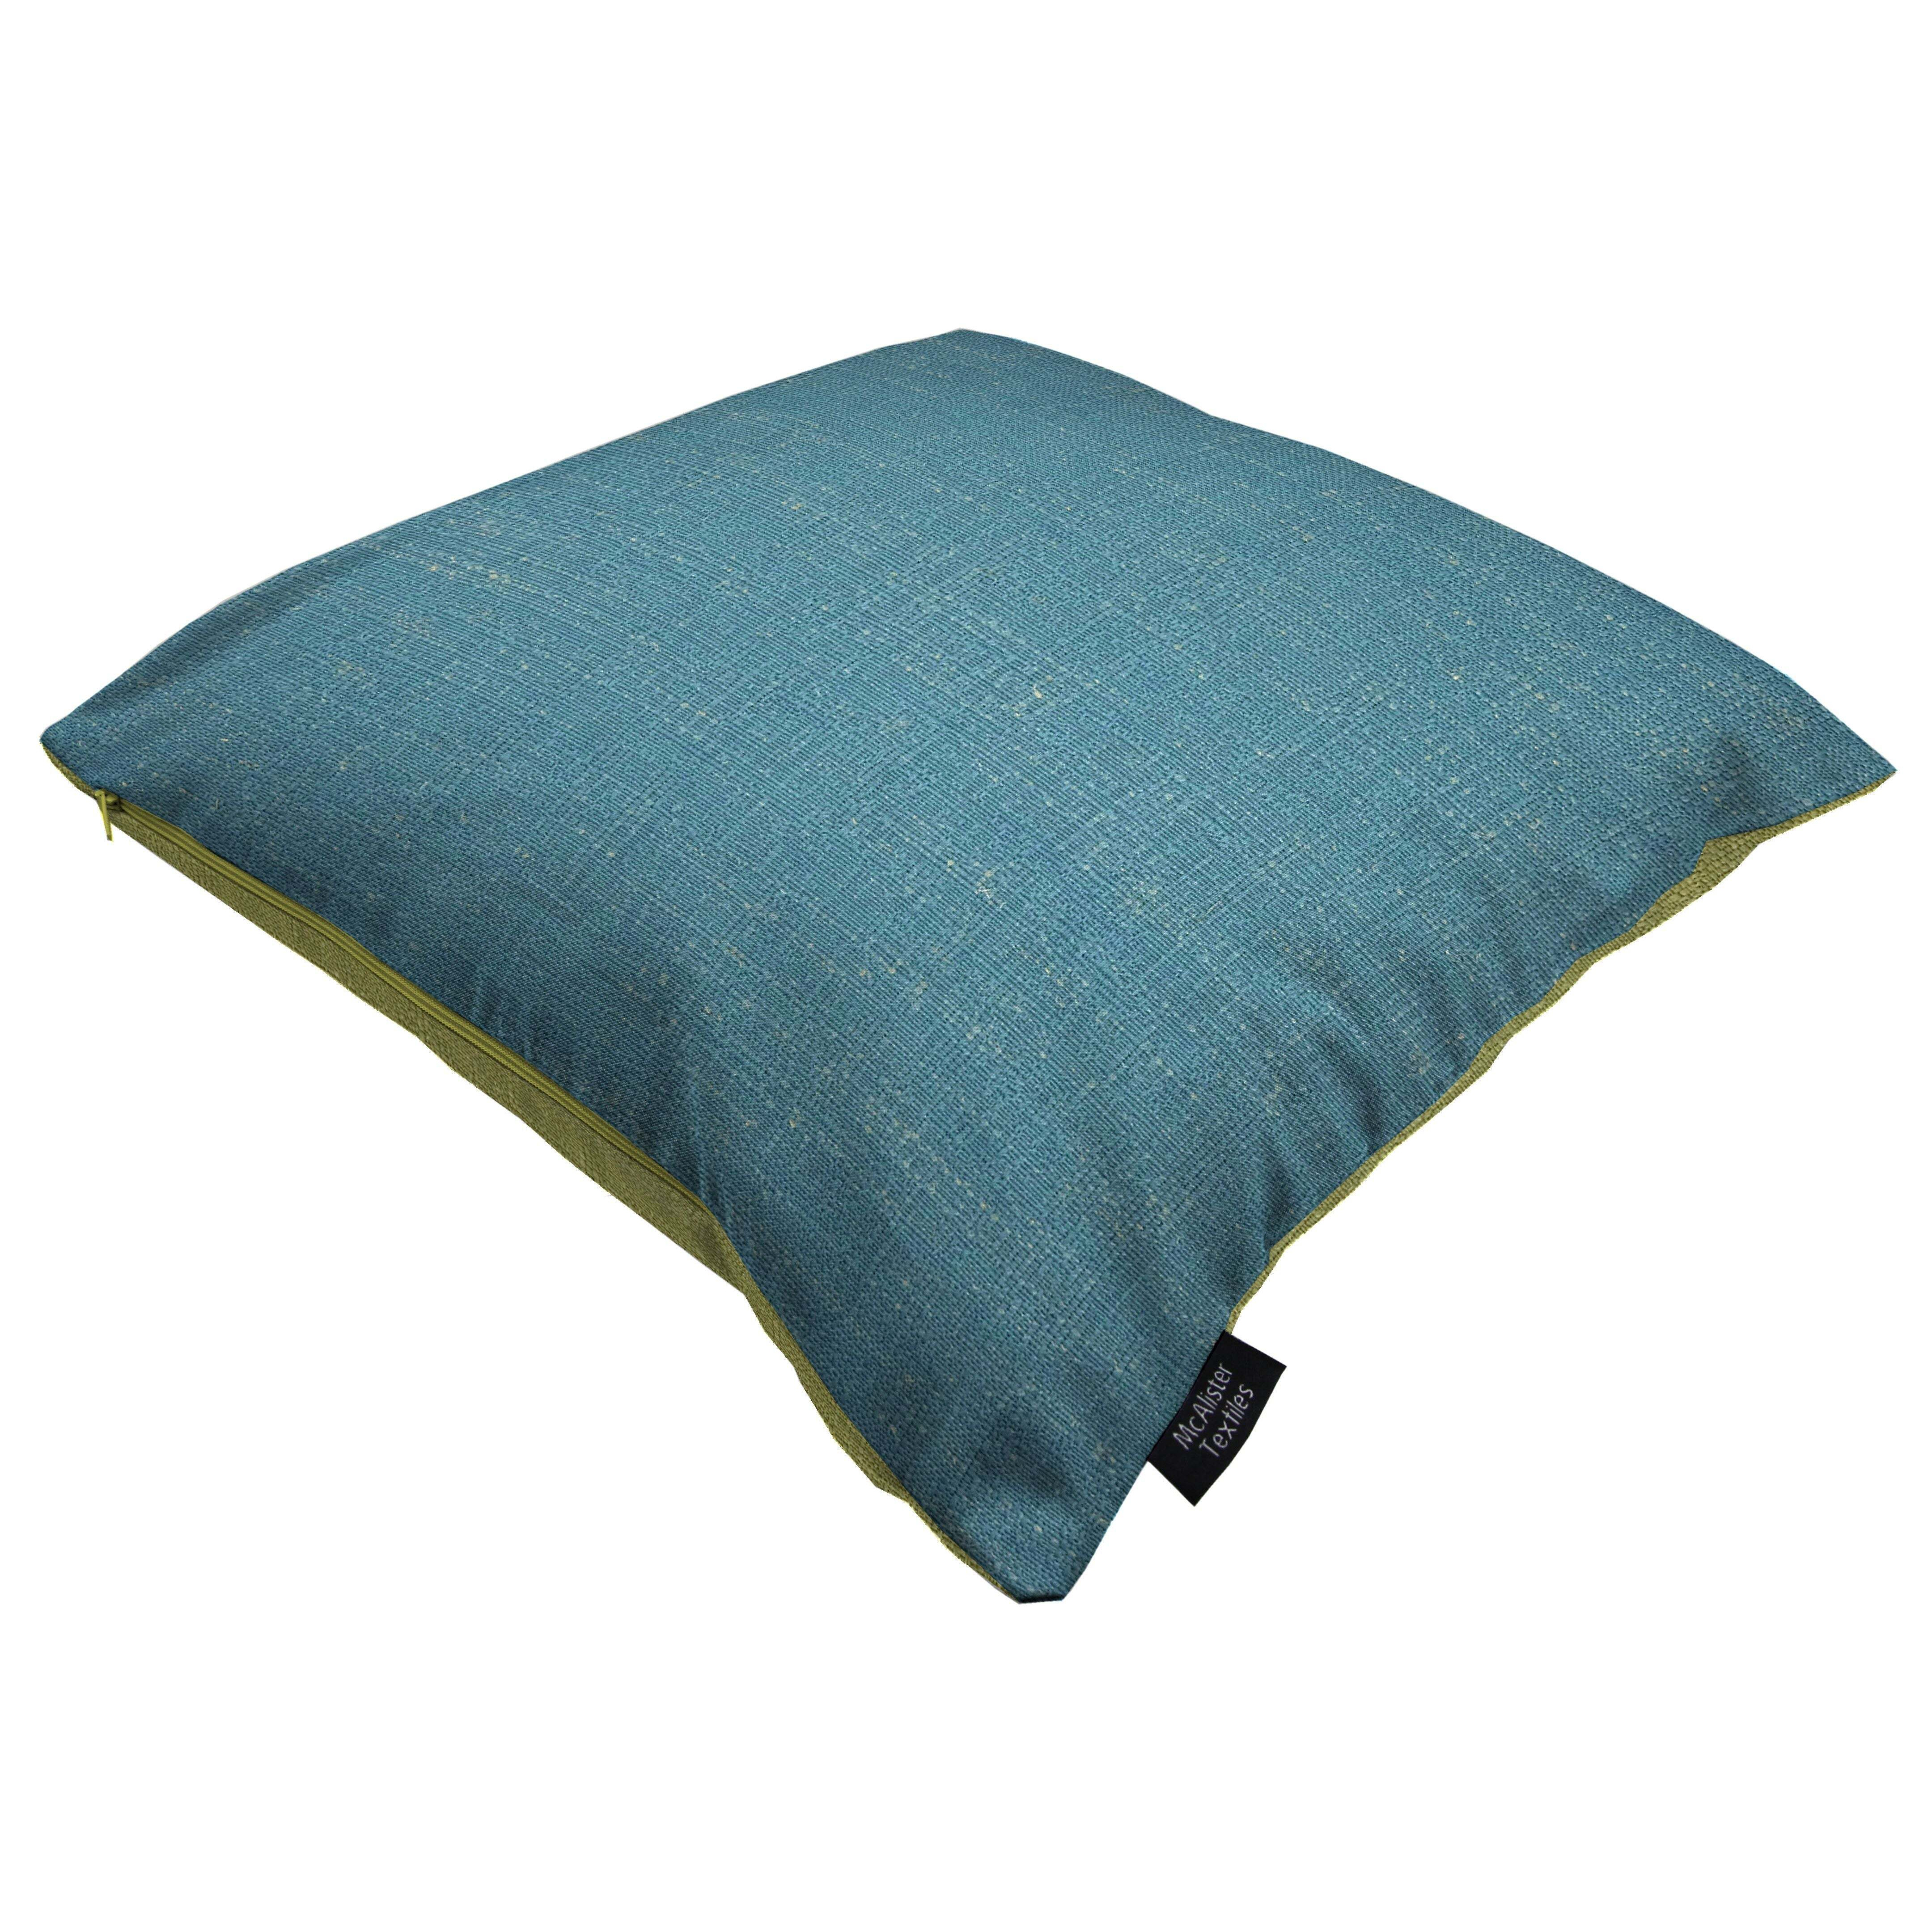 Harmony Teal and Sage Green Plain Cushions, Cover Only / 43cm x 43cm